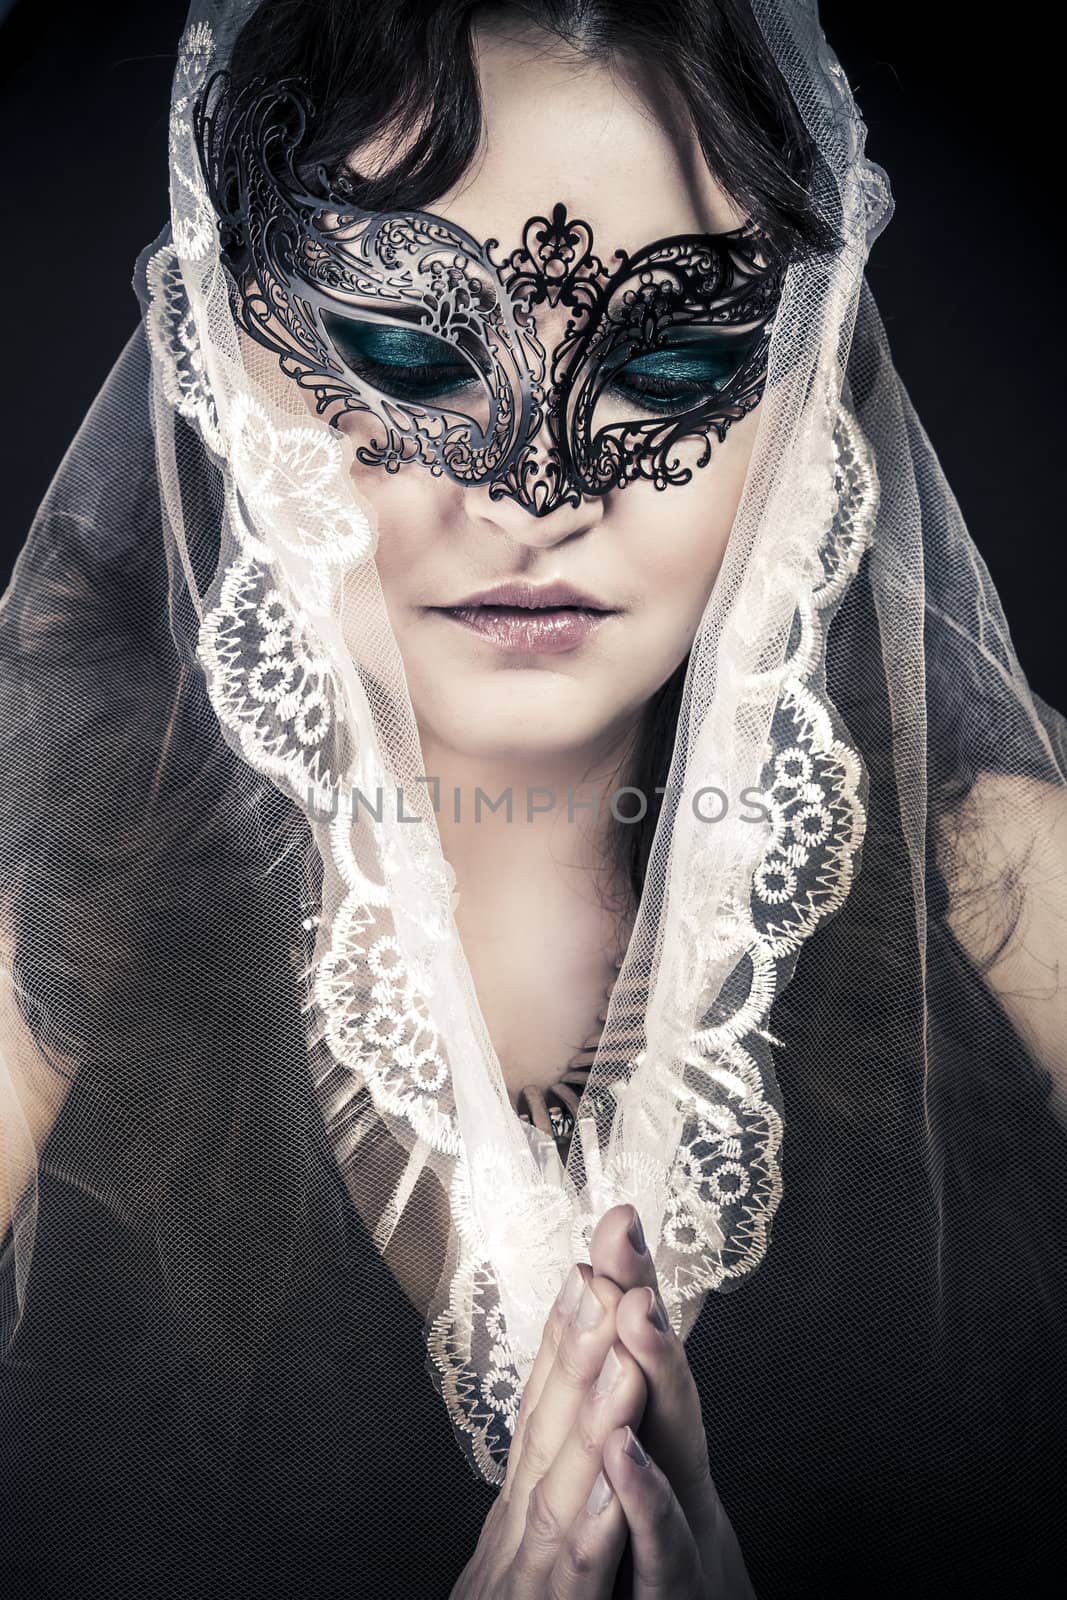 Woman in veil and black dress, glamour scene by FernandoCortes